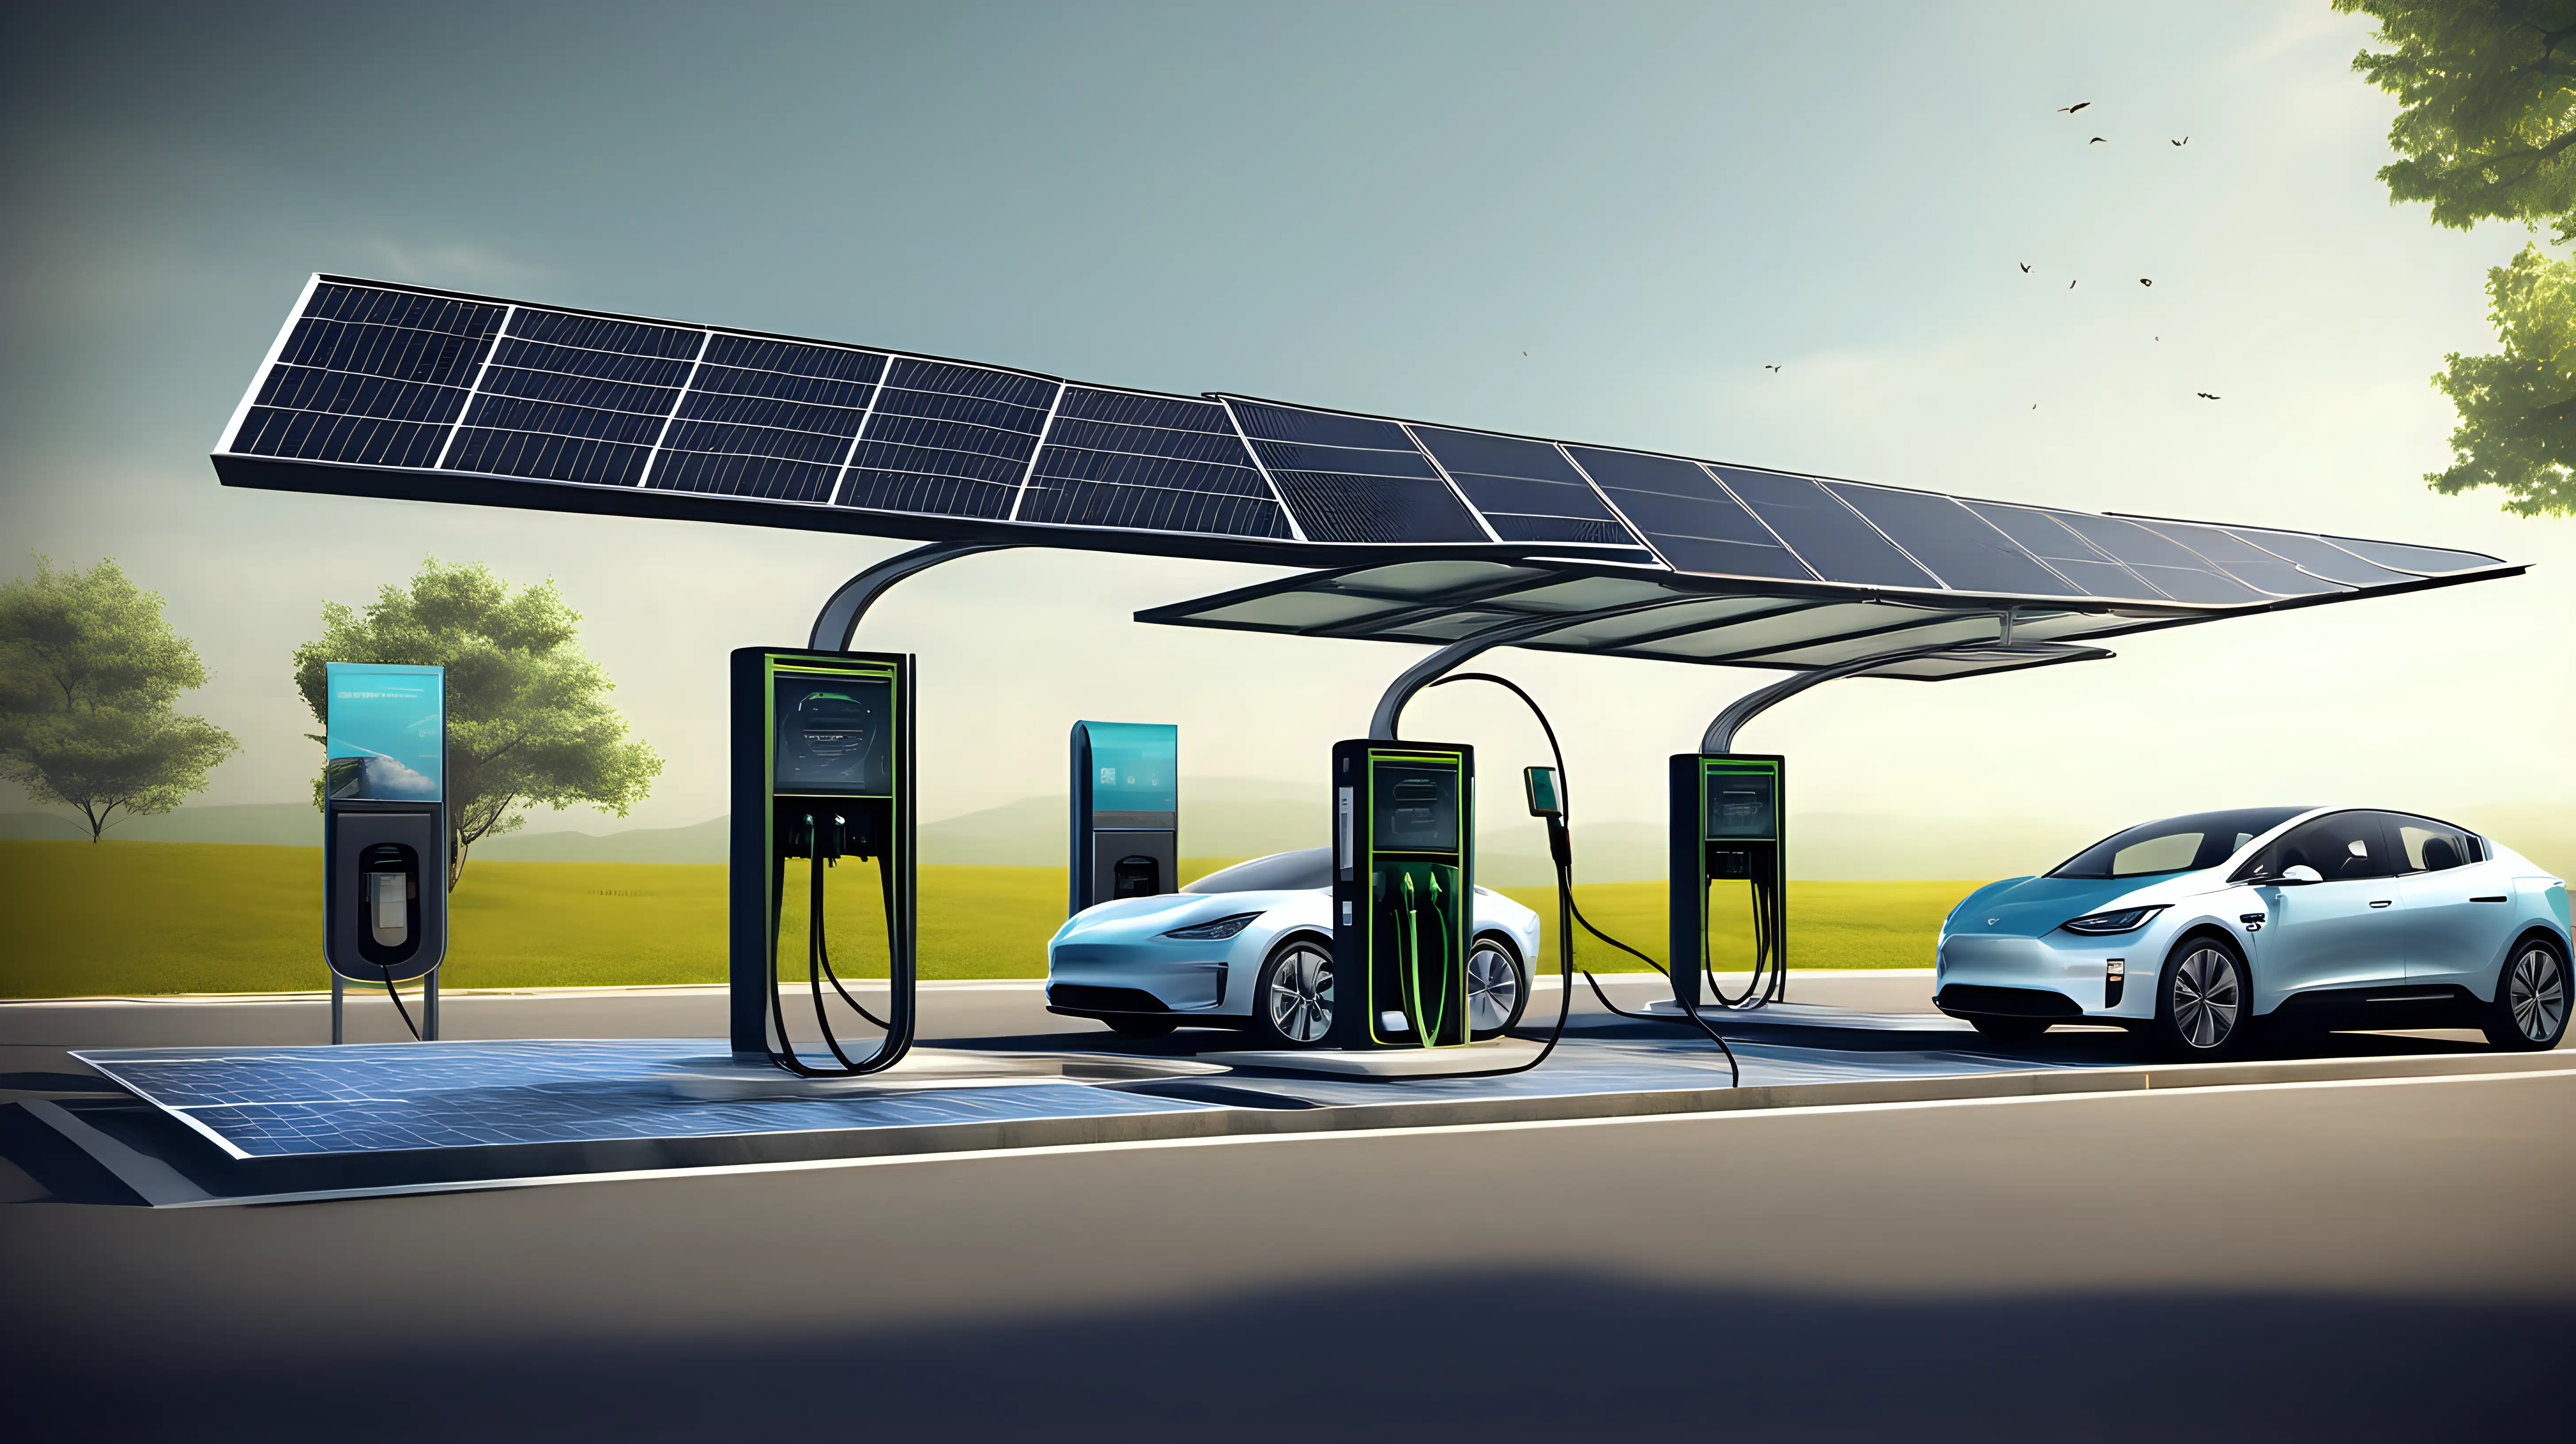 SolarPowered Electric Car Charging Station Embracing Sustainable Mobility